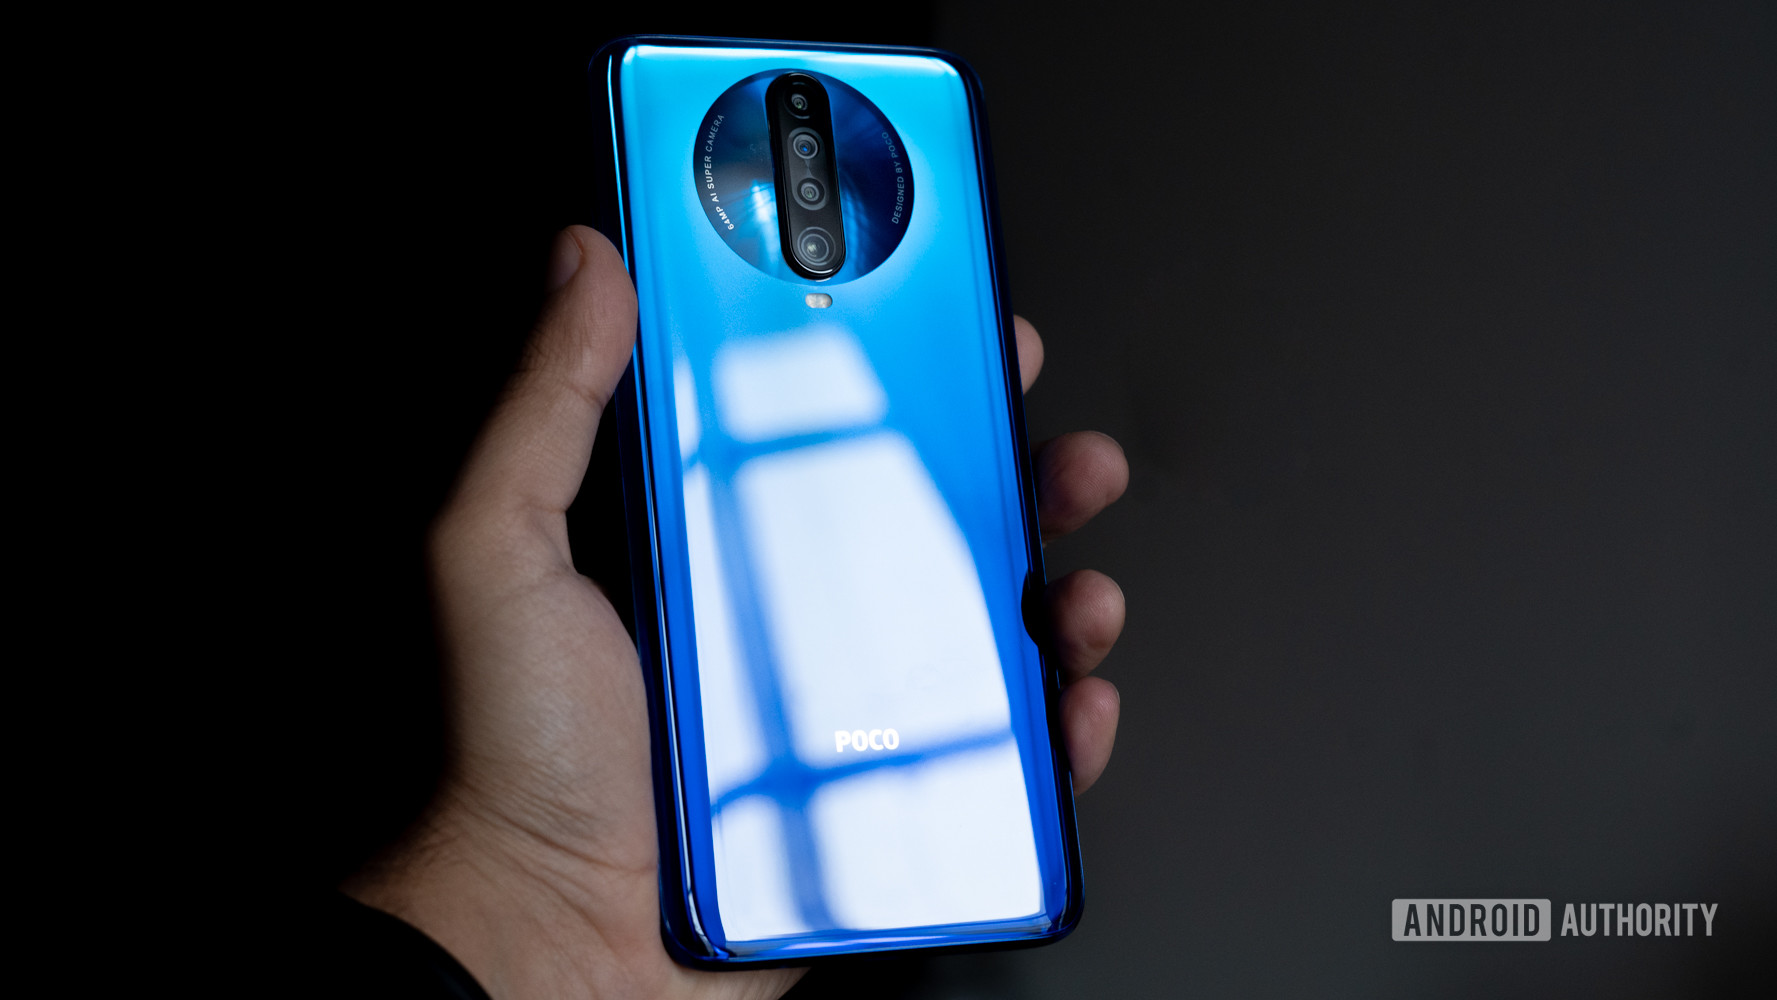 Poco X2 in hand showing back